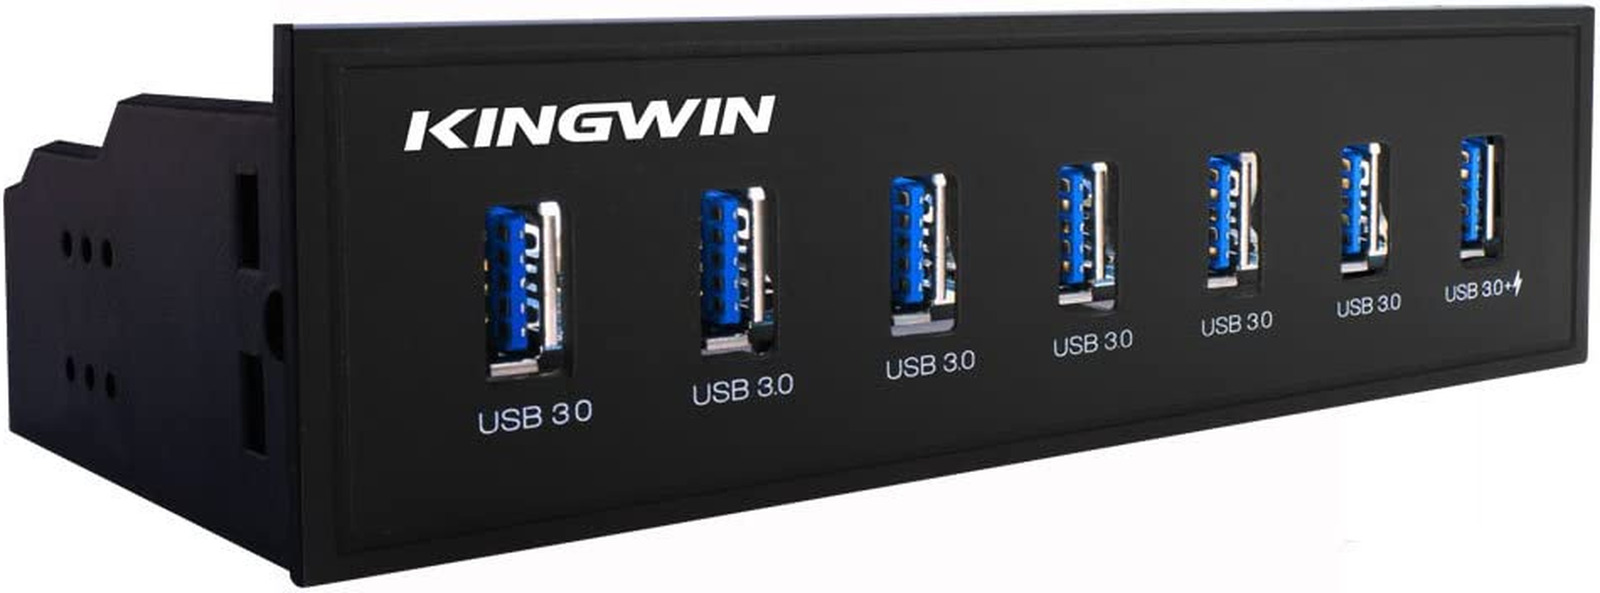 Kingwin 5.25″ Front Panel USB 3.0 Hub 7 Port Include One Fast Charging USB 2.1A